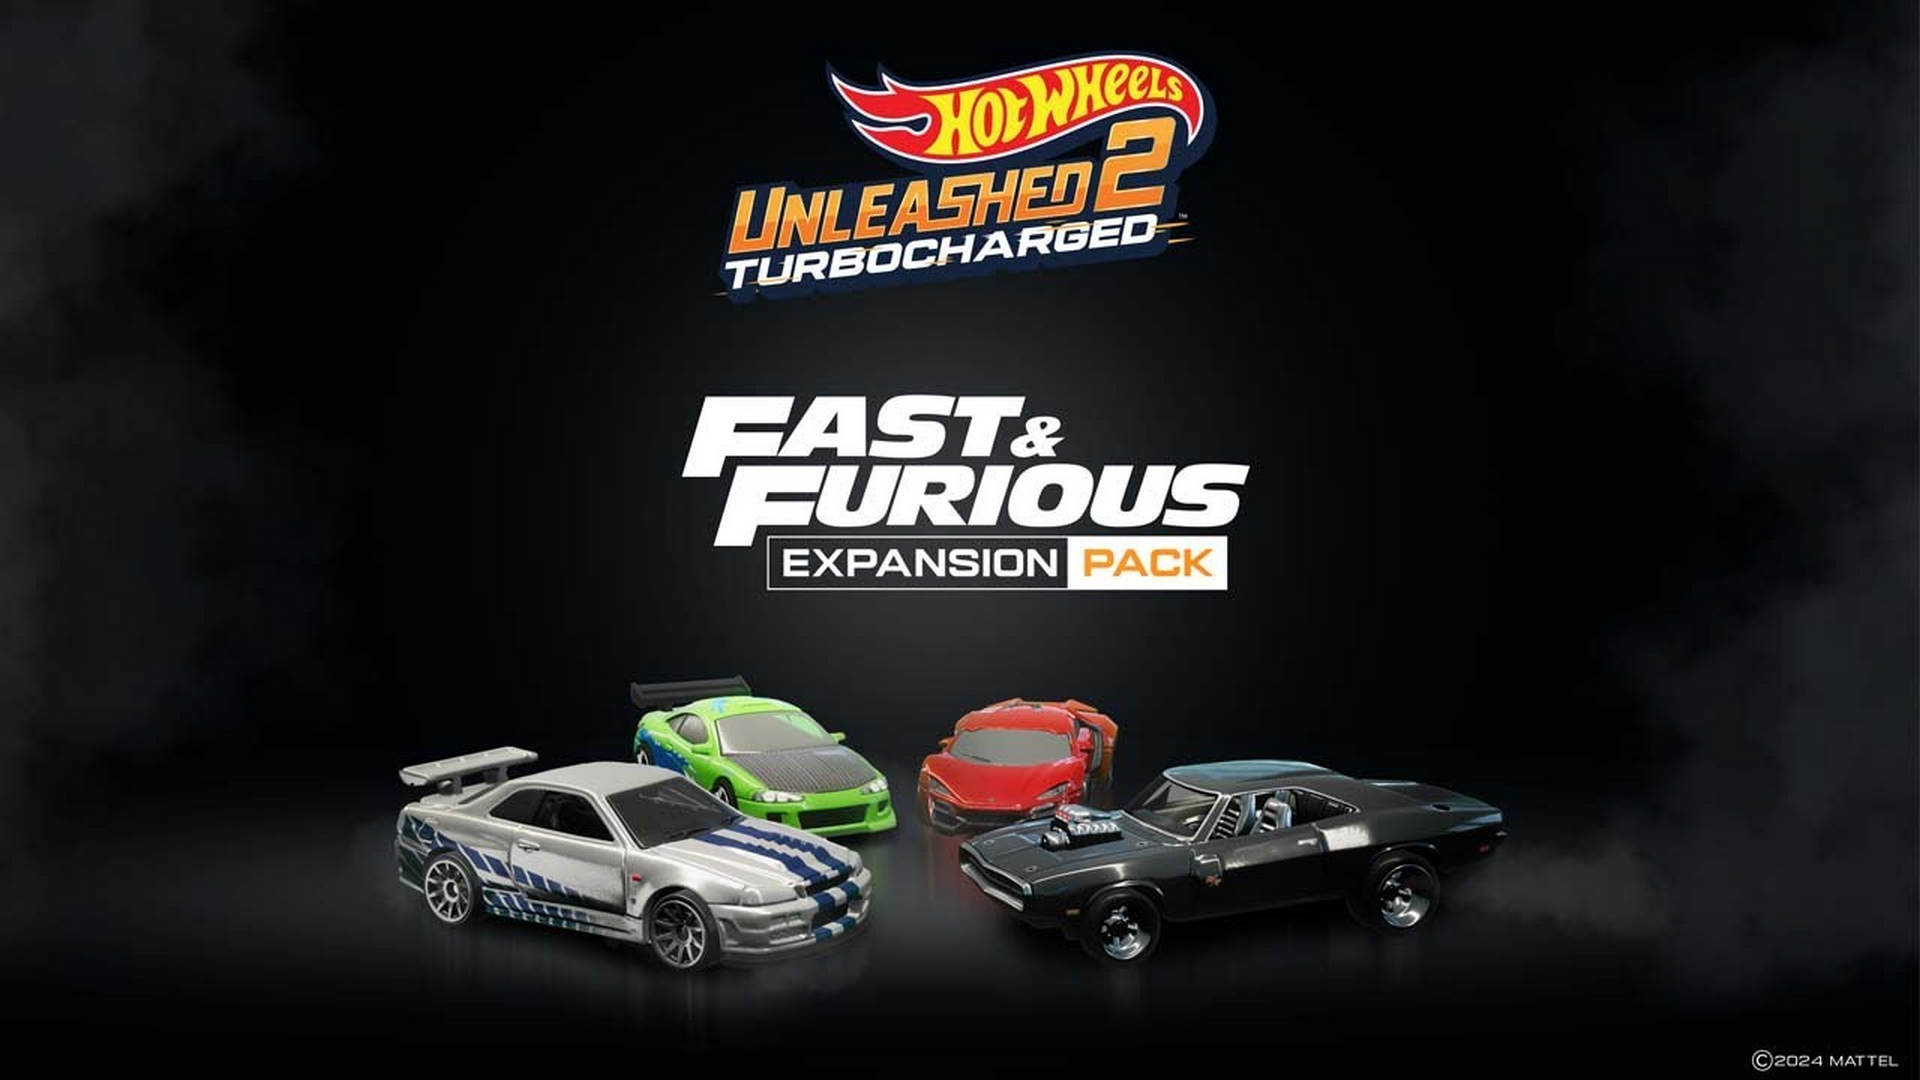 Fast & Furious Expansion Pack For Hot Wheels Unleashed 2 – Turbocharged – Now Available